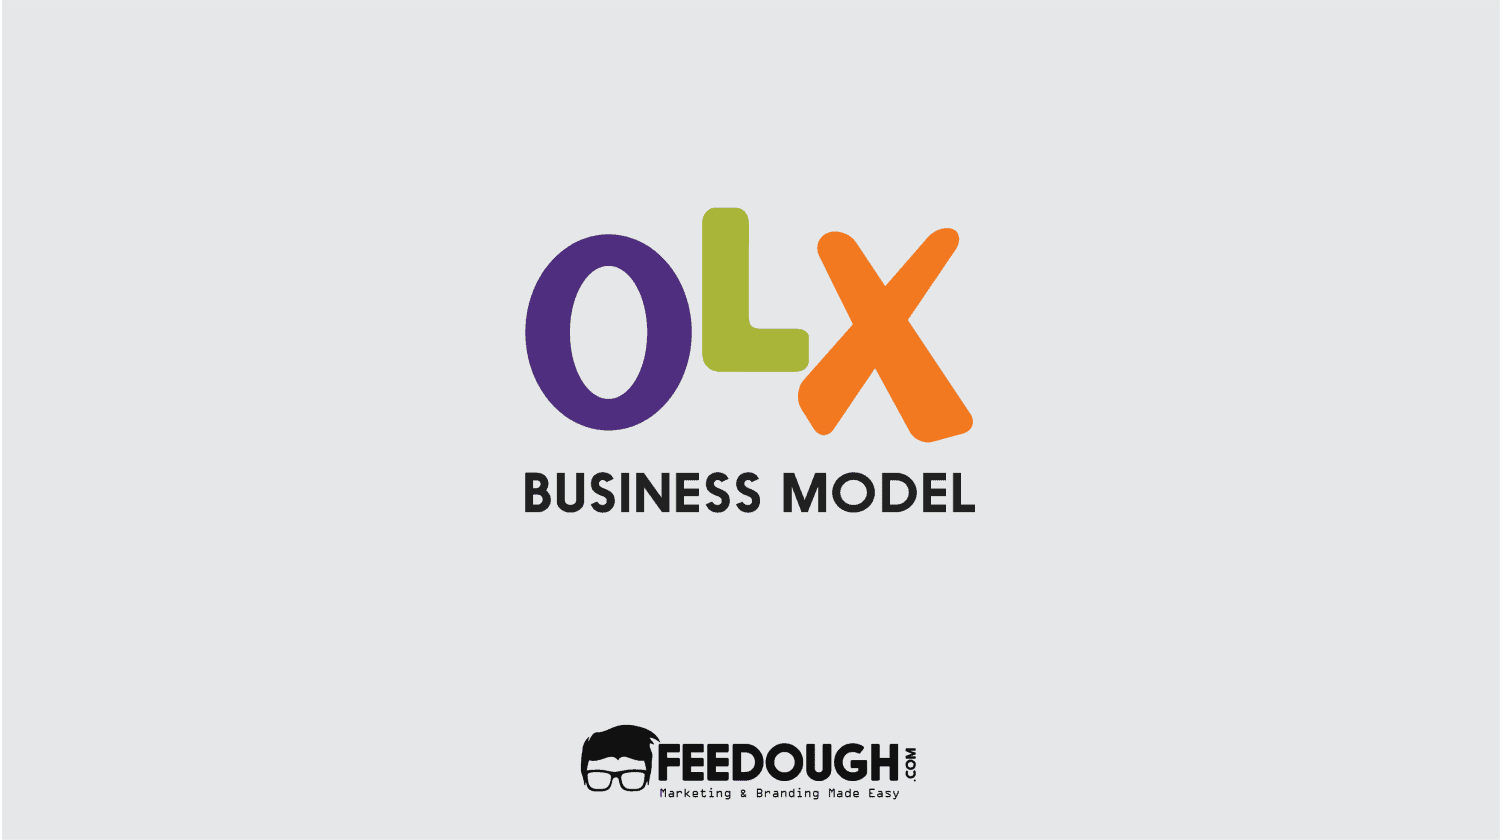 OLX Business Model  How Does OLX Make Money? – Feedough